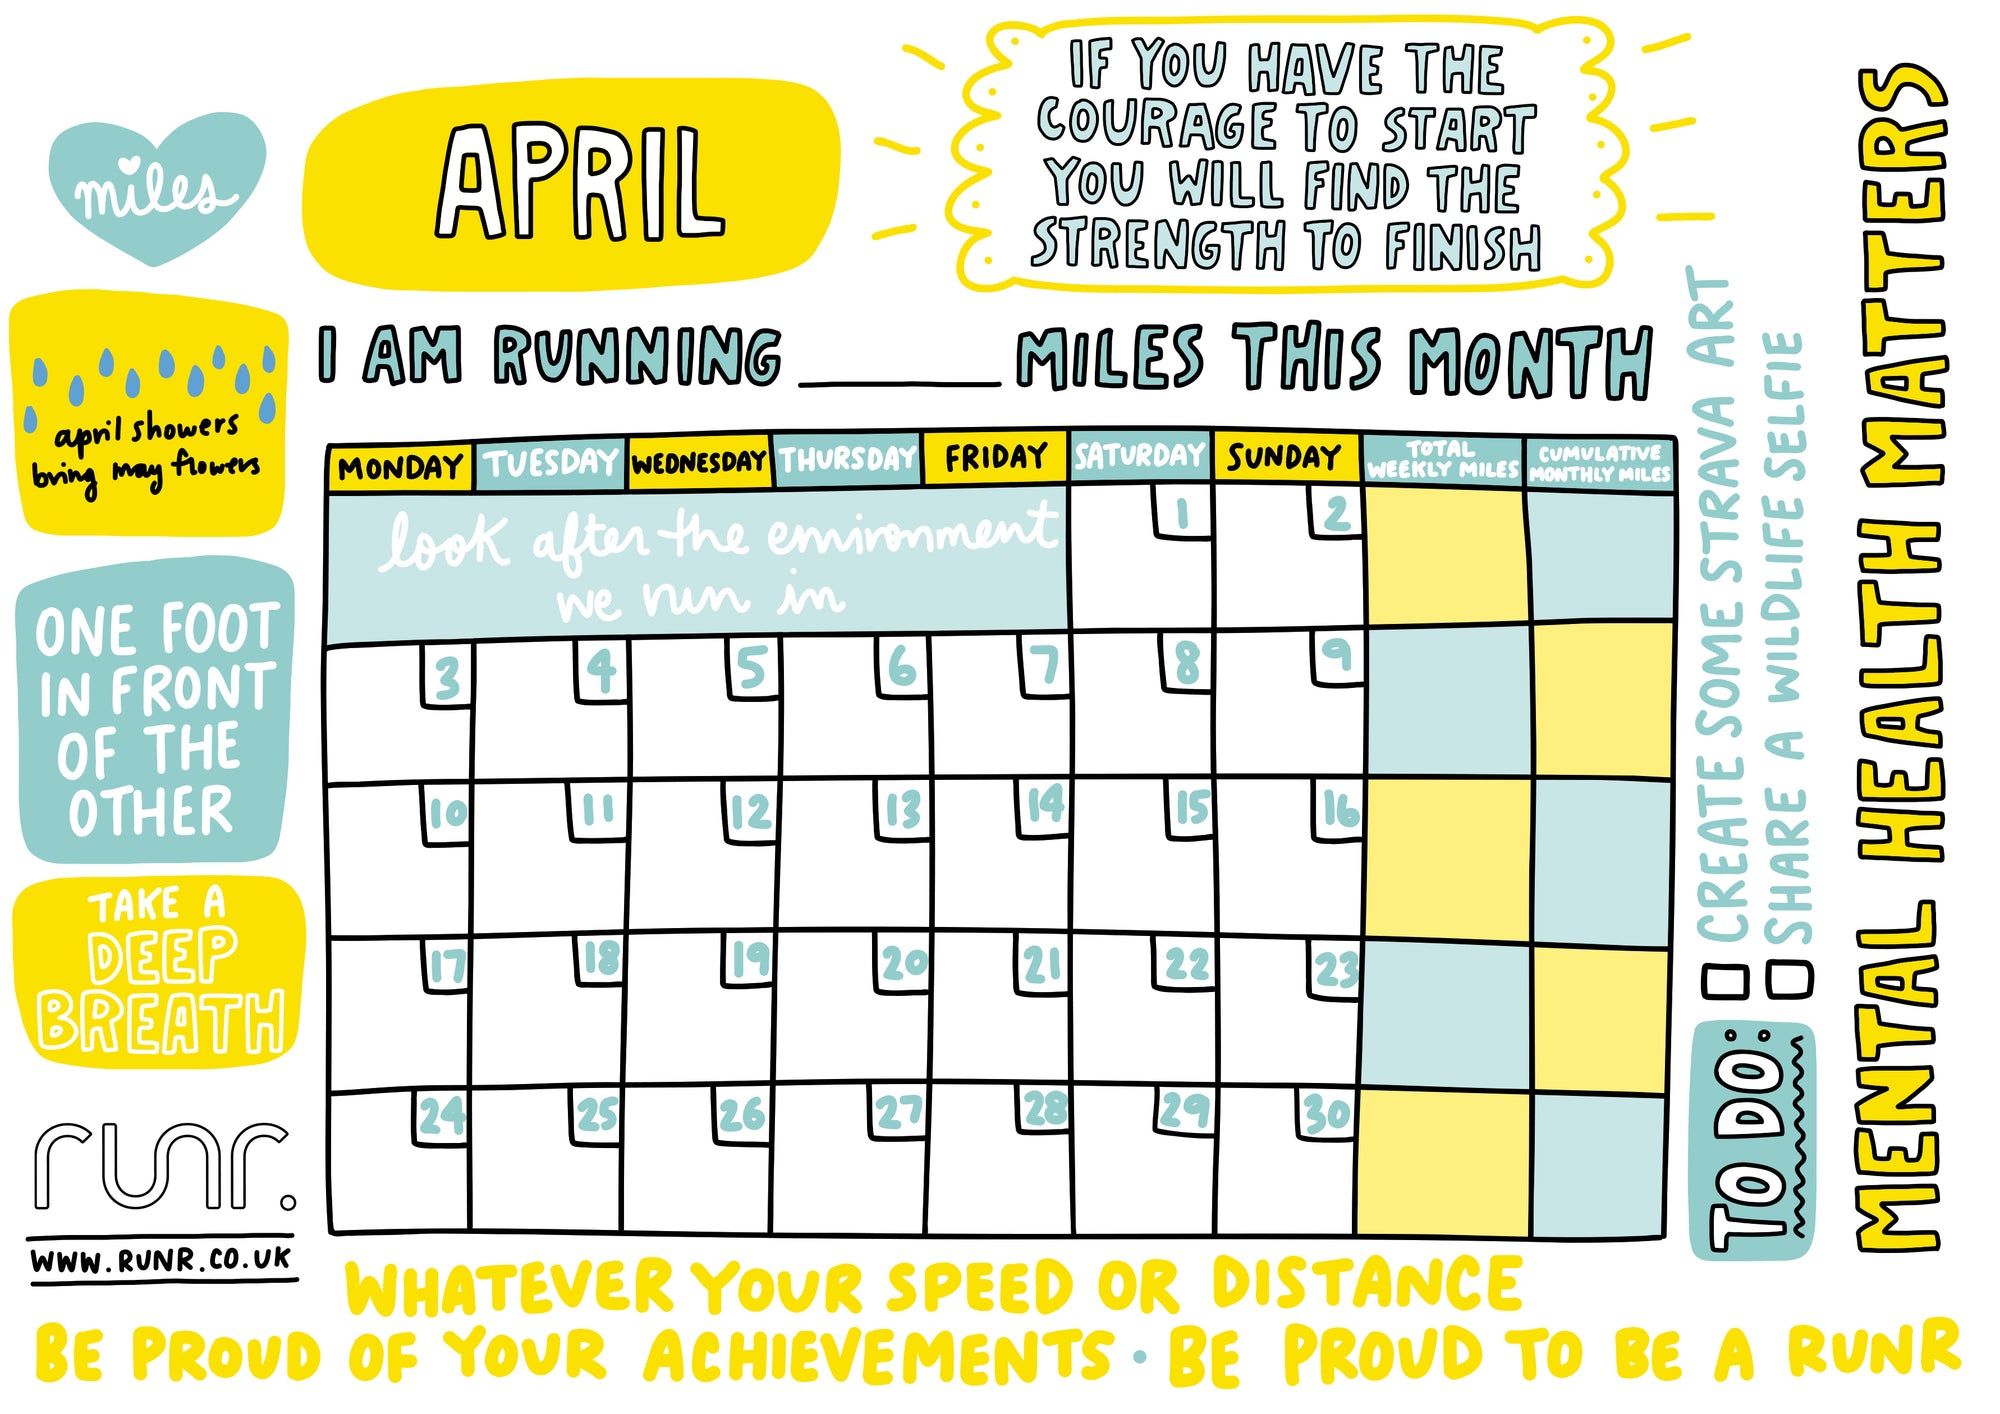 April 2023 Mileage Tracker - Free to Download!